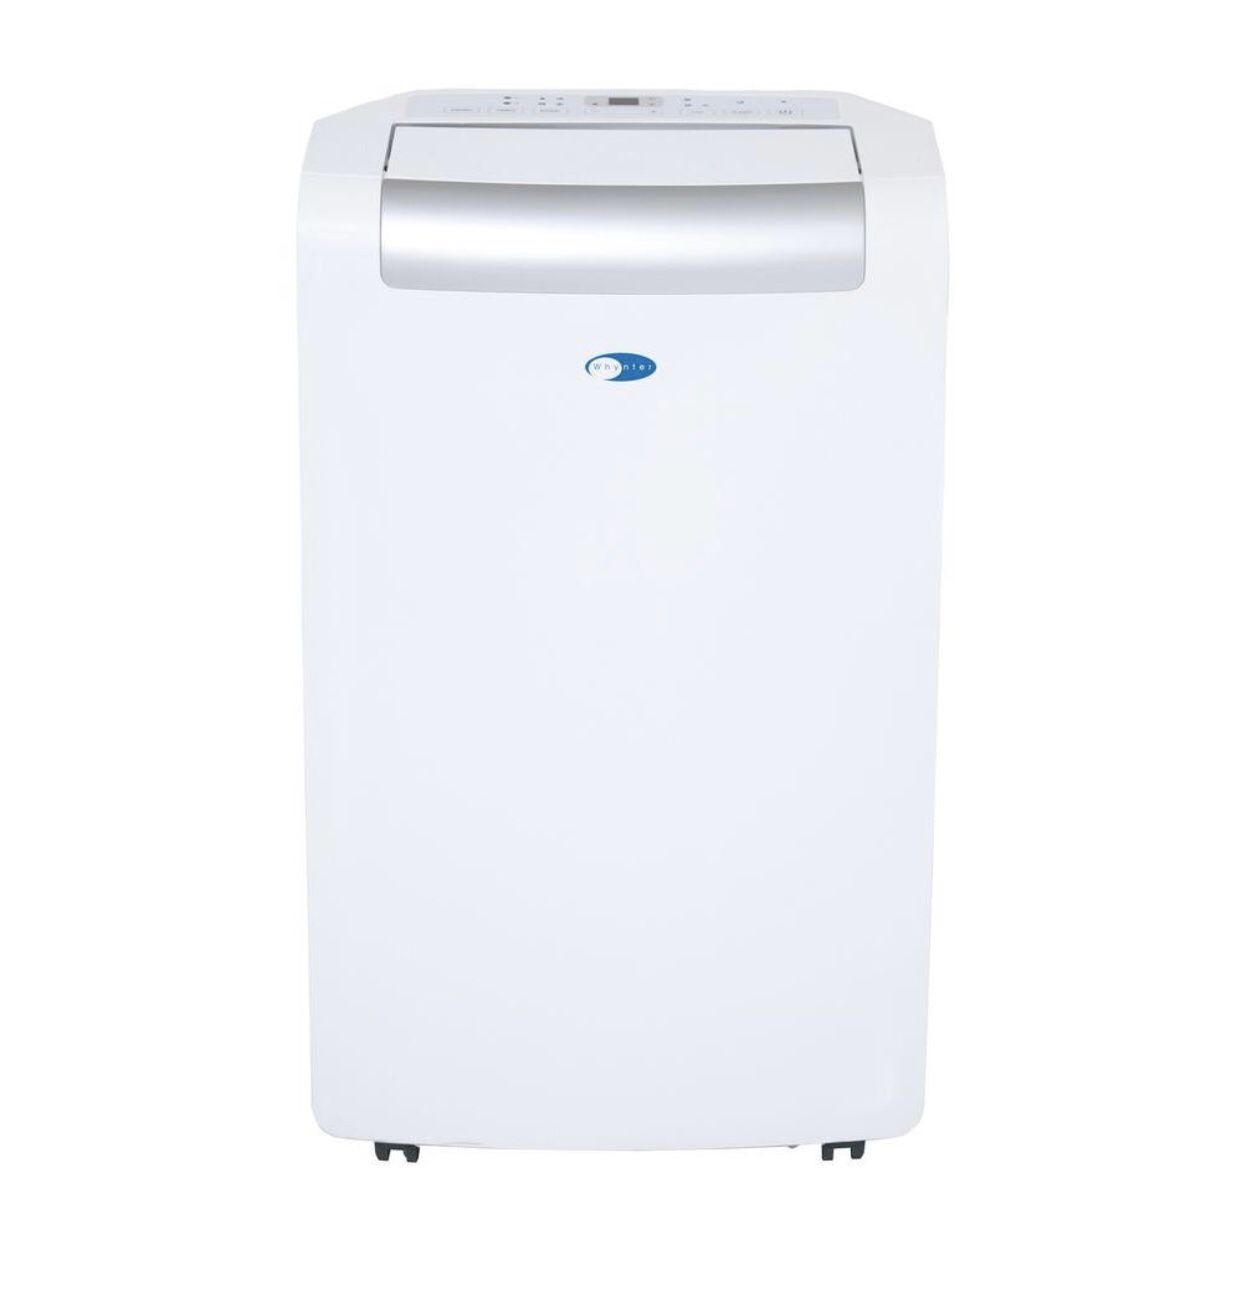 Whynter 14,000 BTU Portable Air Conditioner with Dehumidifier and 3M Silvershield Filter